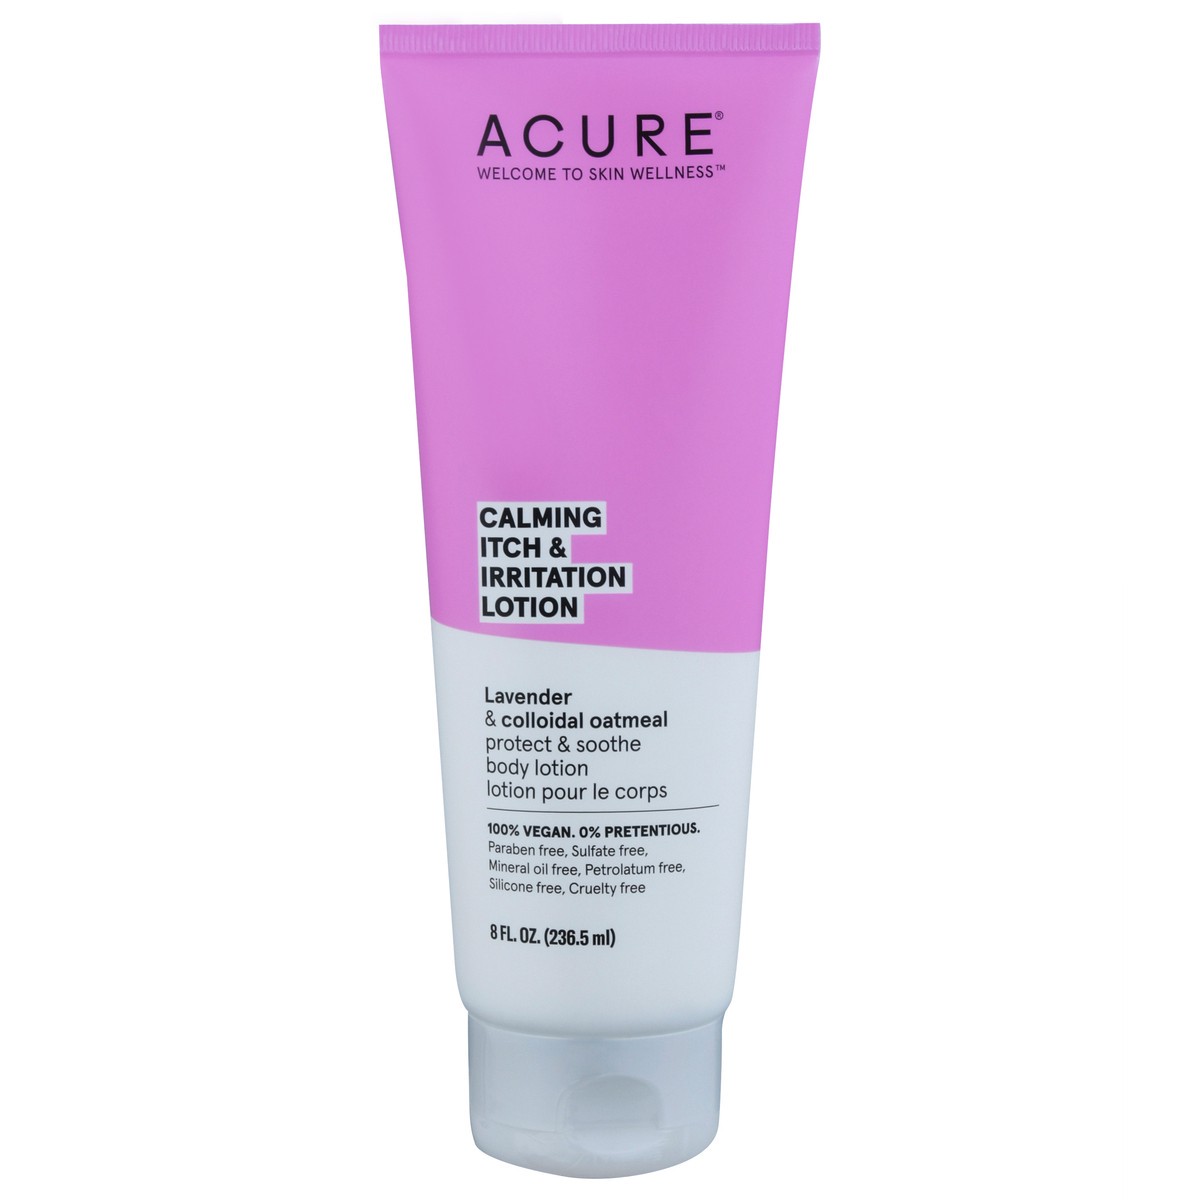 slide 13 of 13, ACURE Calming Itch & Irritation Lotion, 8 fl oz